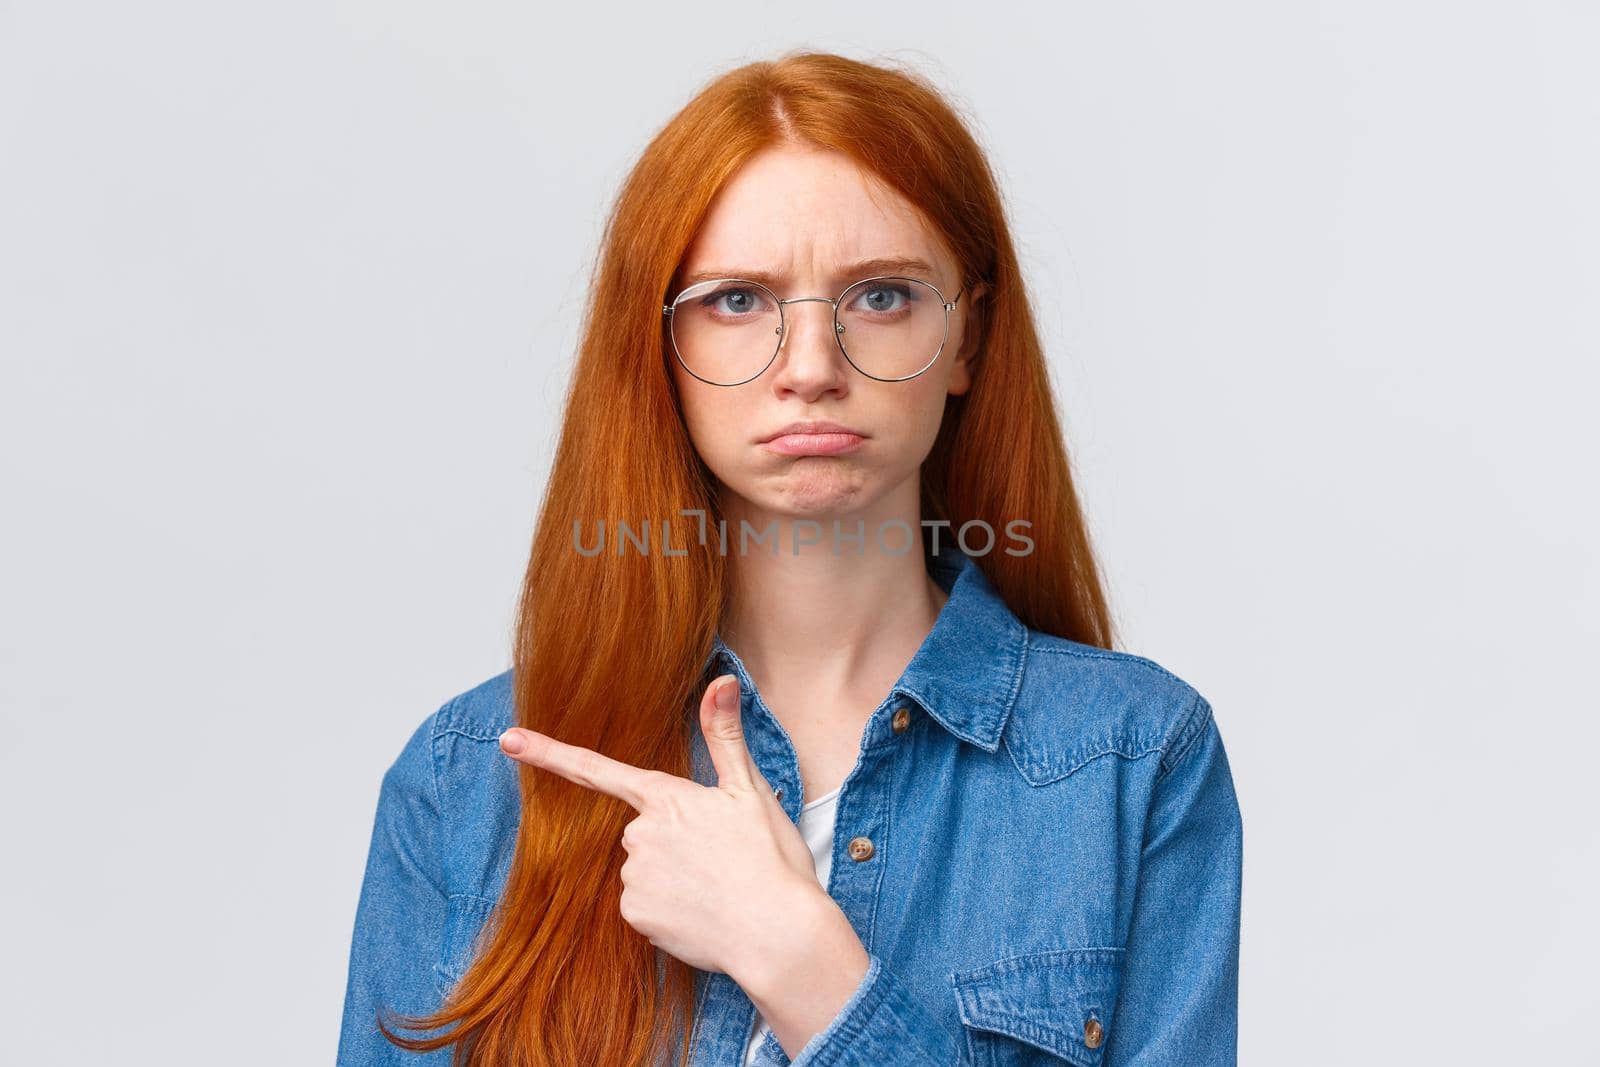 Close-up gloomy and upset, offended sulking girlfriend want something and pointing envy left, indicate disappointing promo, unfair situation, pouting and frowning look displeased, white background.